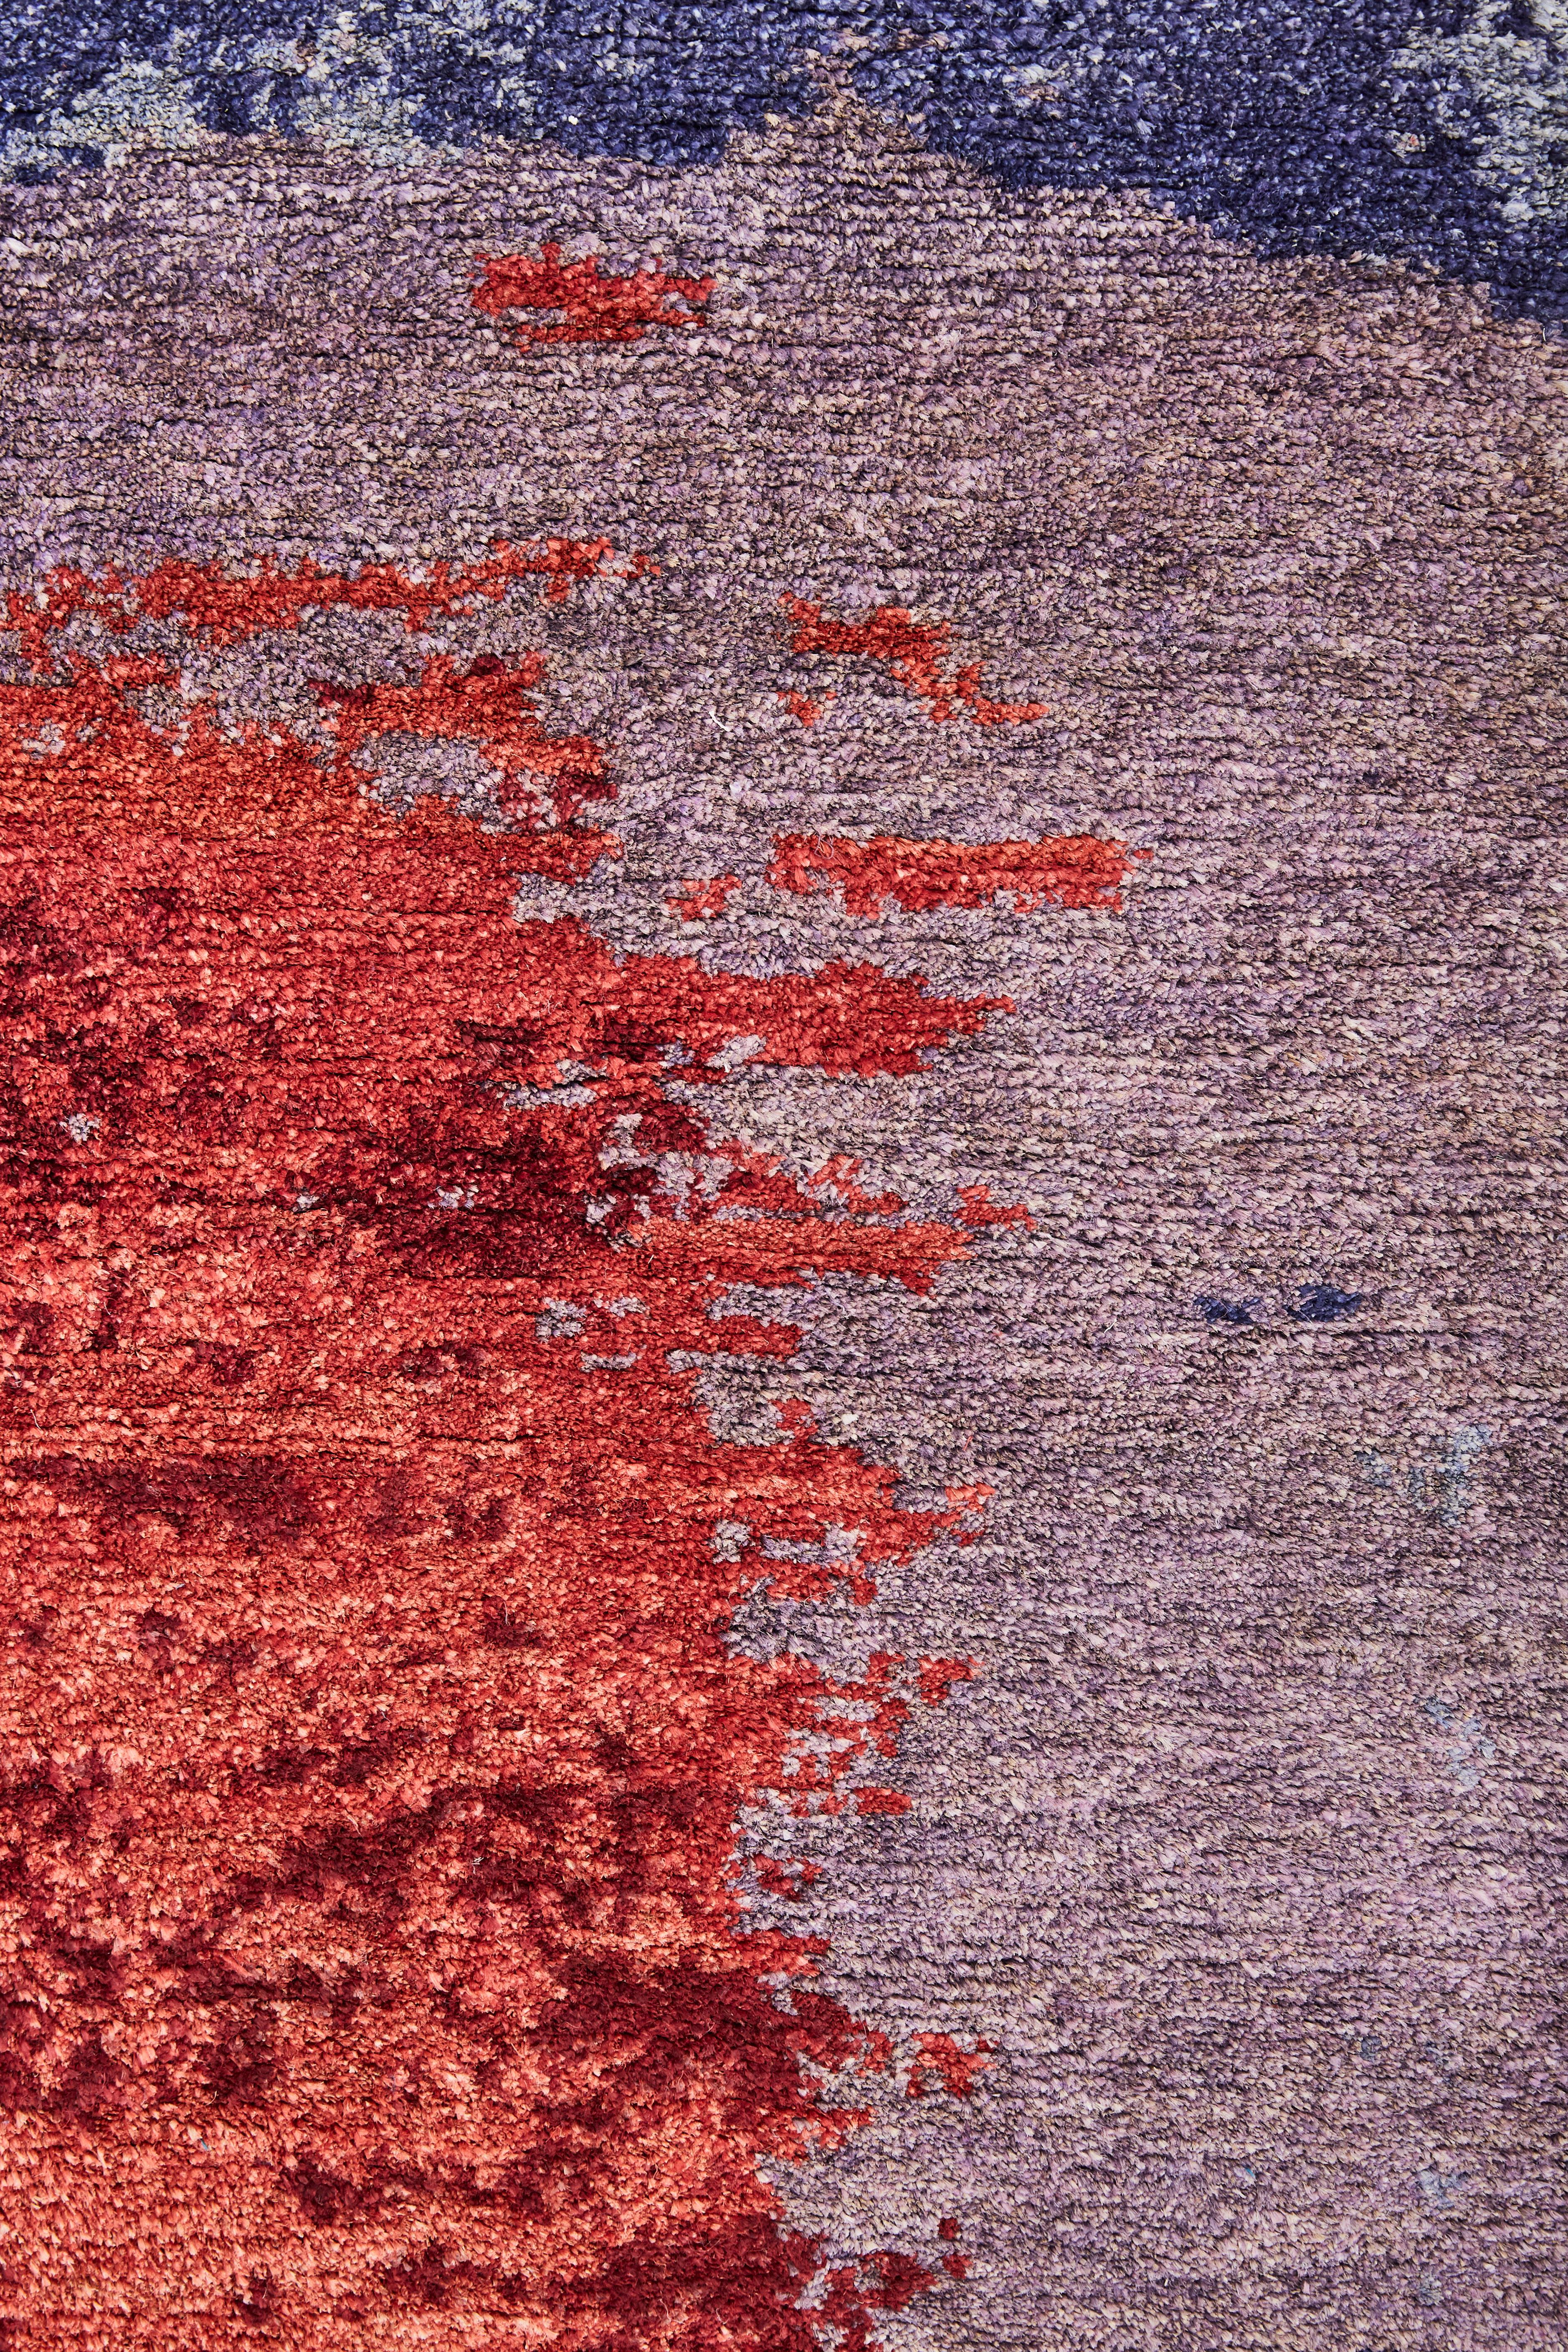 The Oltre carpets by MarCo Carini present a natural weave, both hand knotted with 100 knots per sqm
The chosen colors for this project are blend of tea, violet, wisteria, periwinkle, saffron and dandelion,
Inspired by Mark Rothko's paintings,